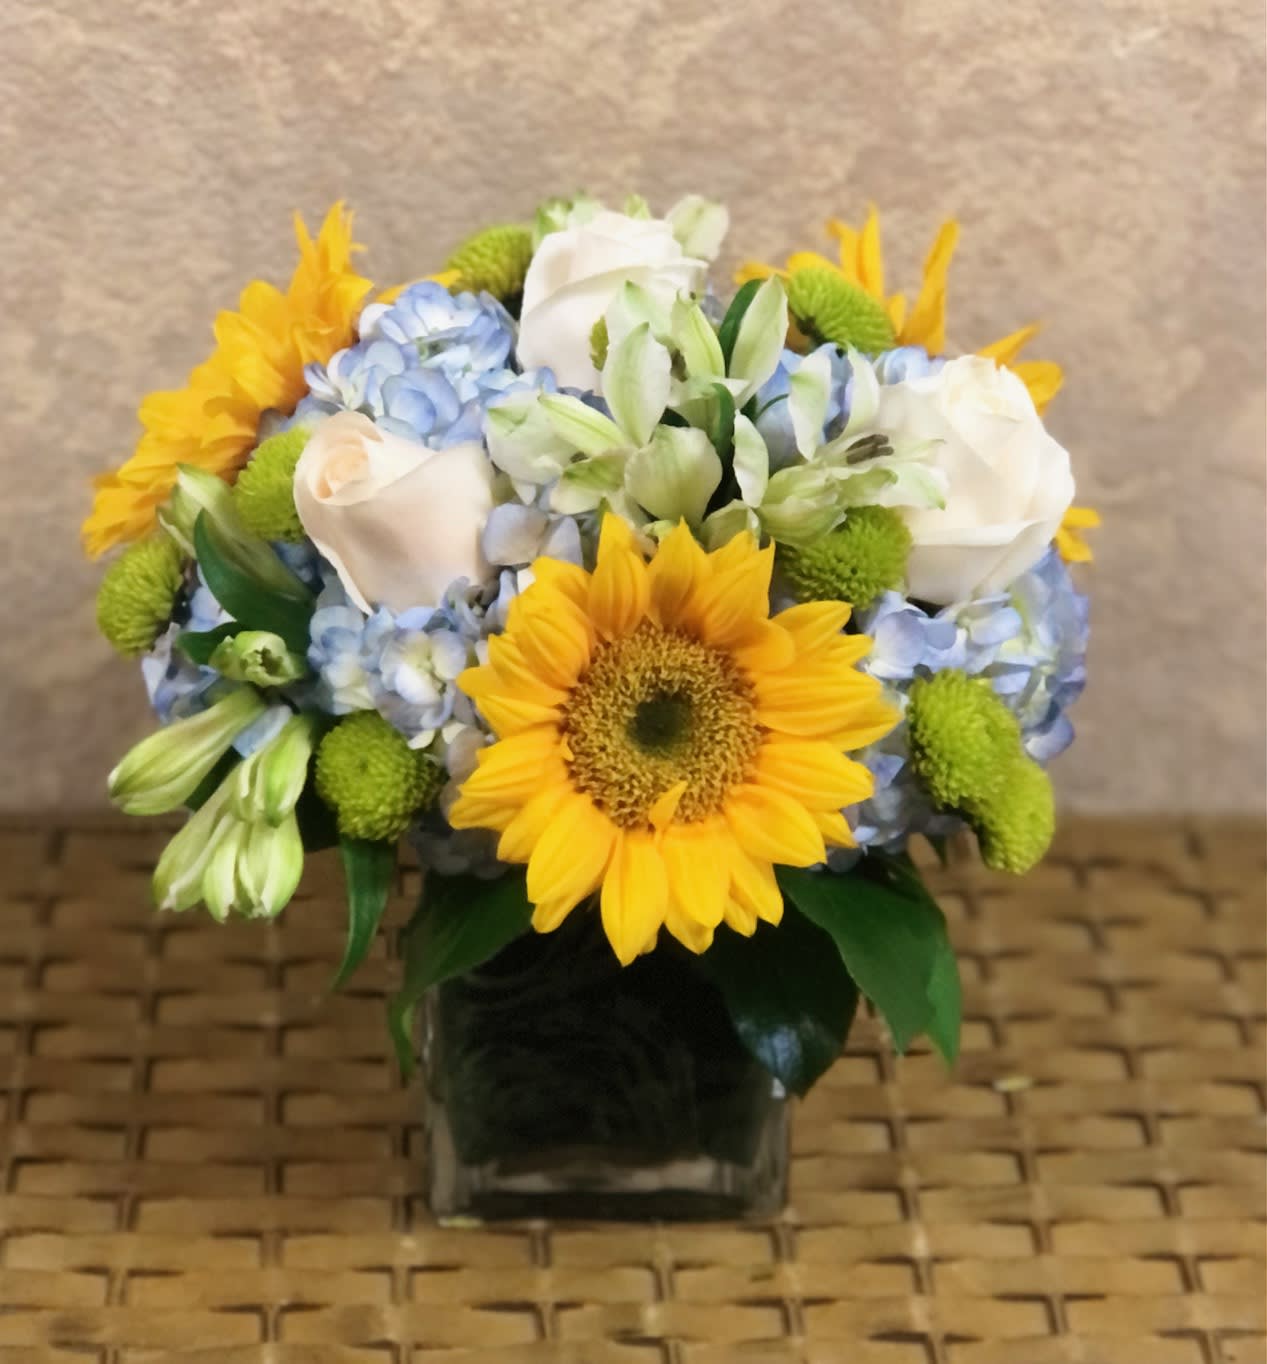 Sunshine by the Ocean - Our most selling bouquet is a summer gift everyone will love with ocean blues and yellow sunny sunflowers. Type of flowers: Blue Hydrangeas, Sunflowers, White Roses, White Alstroemerias and Green Button Mums in a clear vase with a deep blue wrap. Season Availability: All year round Dimensions: Square clear vase 5&quot; by 4&quot; Substitute Availability: Yes